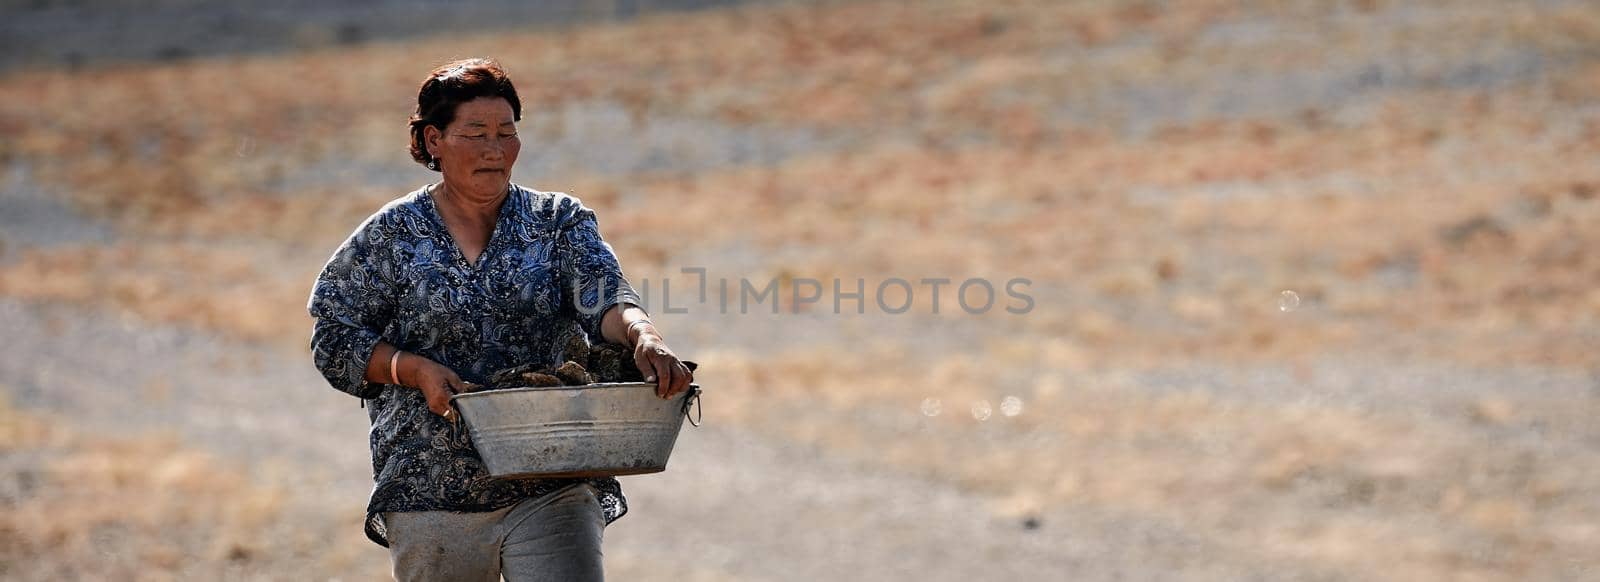 Mongolian woman carries dried manure for kindling the stove. Life of a Mongolian family. 06.09.2019. Gobi Desert, Mongolia. by EvgeniyQW